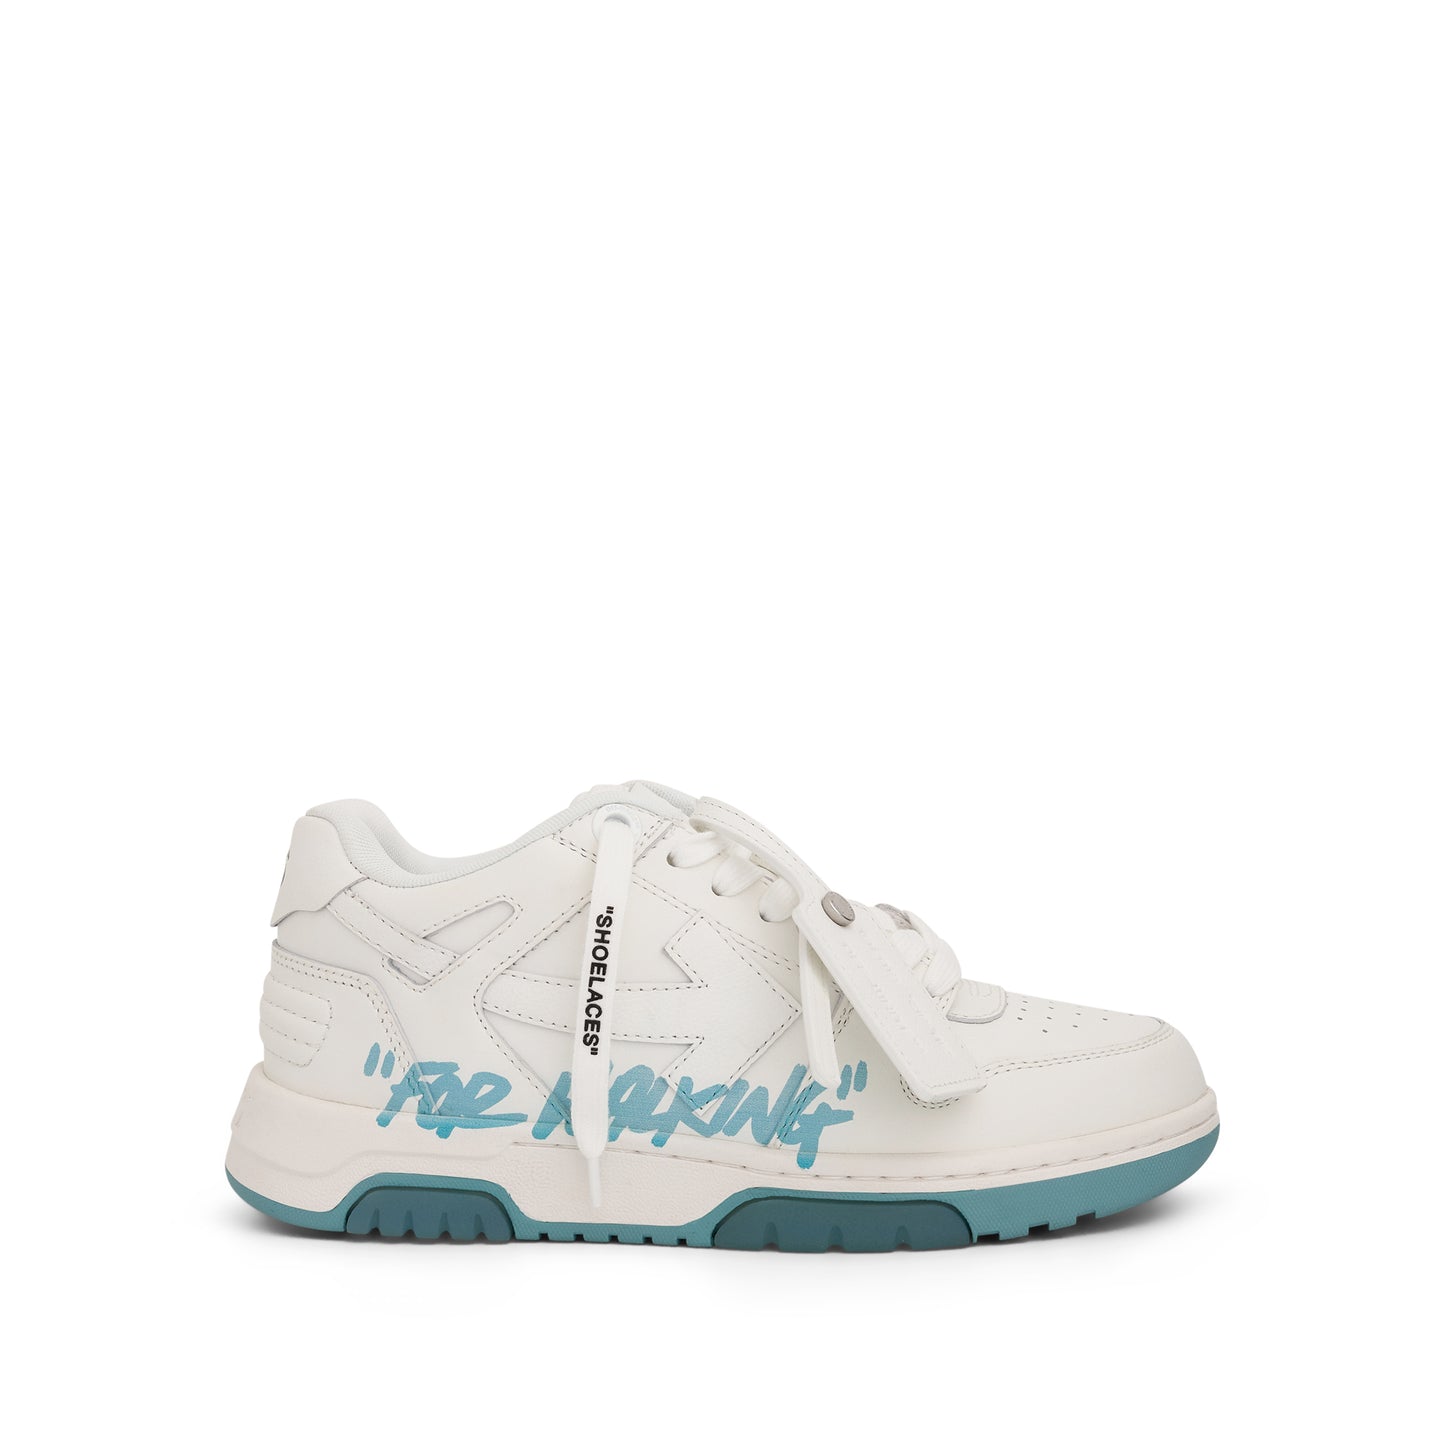 Out Of Office 'For Walking' Sneaker in White/Celadon